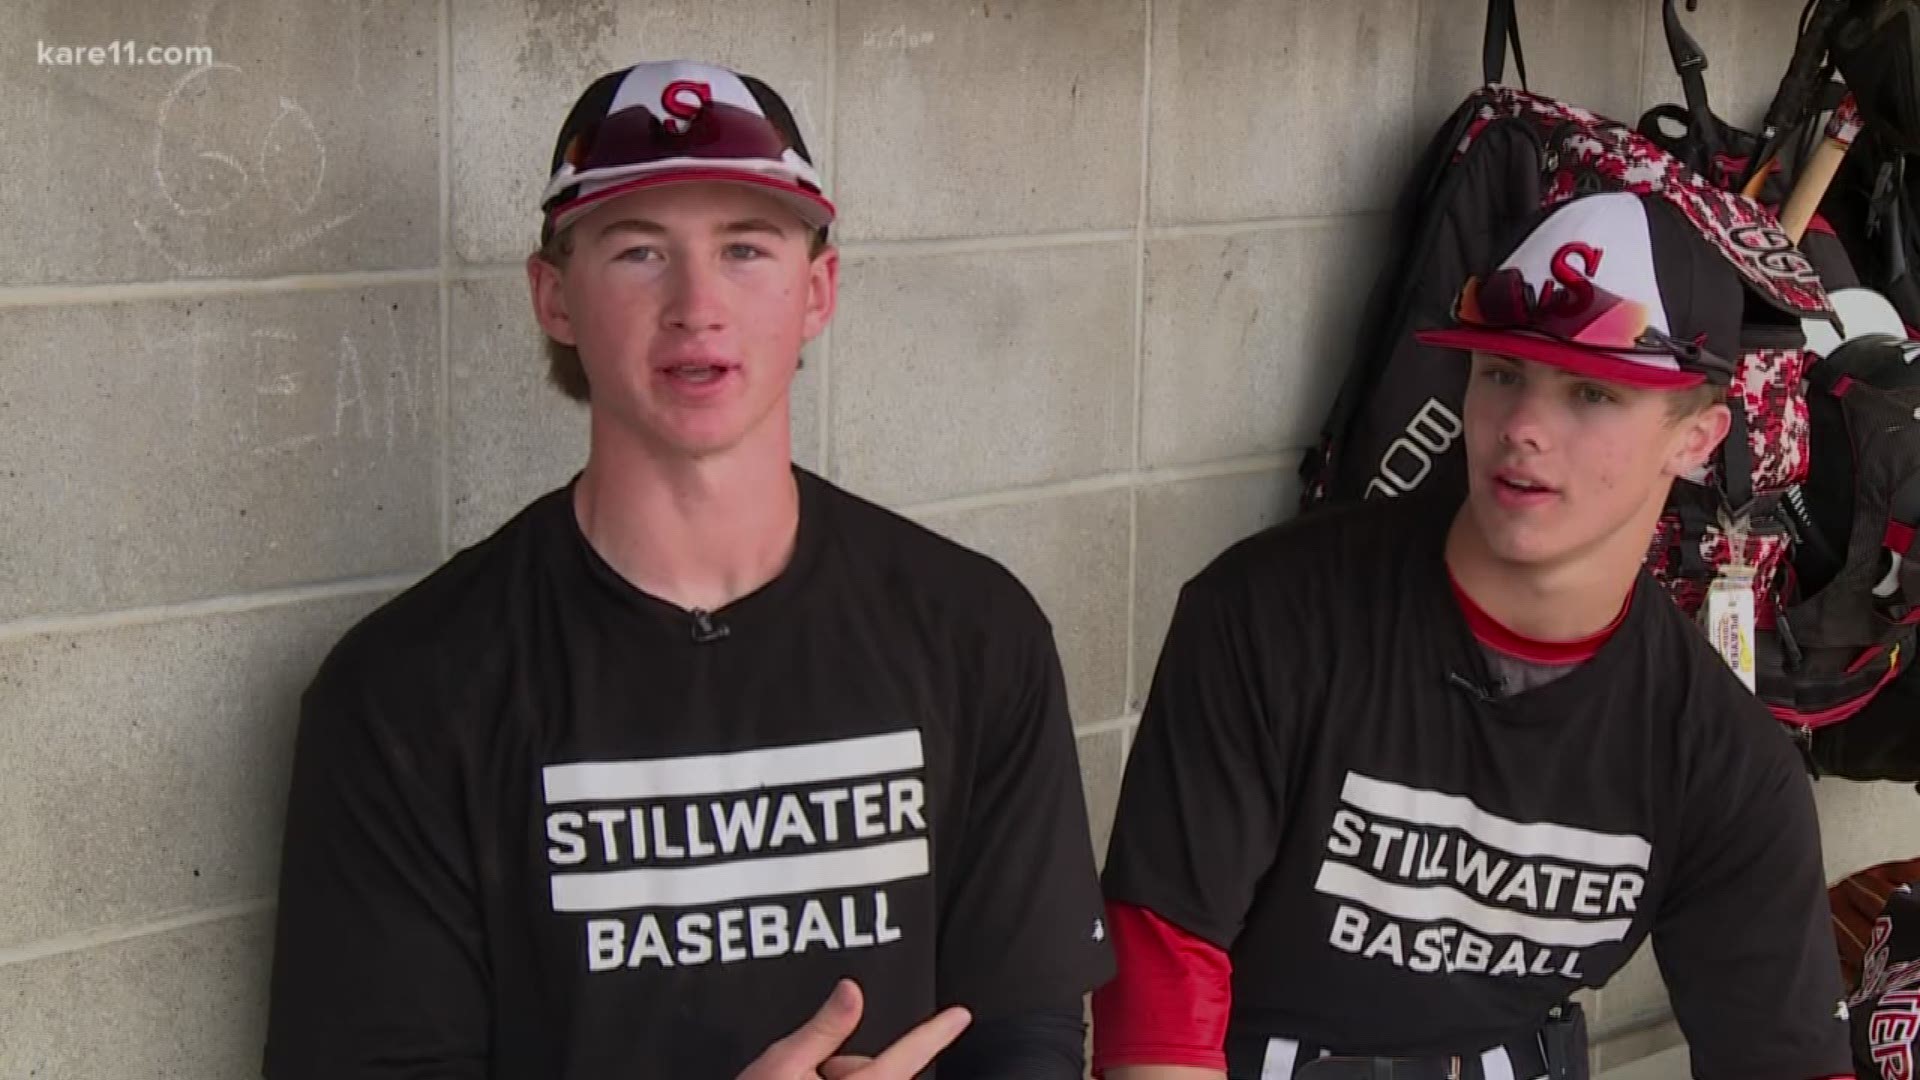 Dynamic duo leads the way for Stillwater HS baseball team